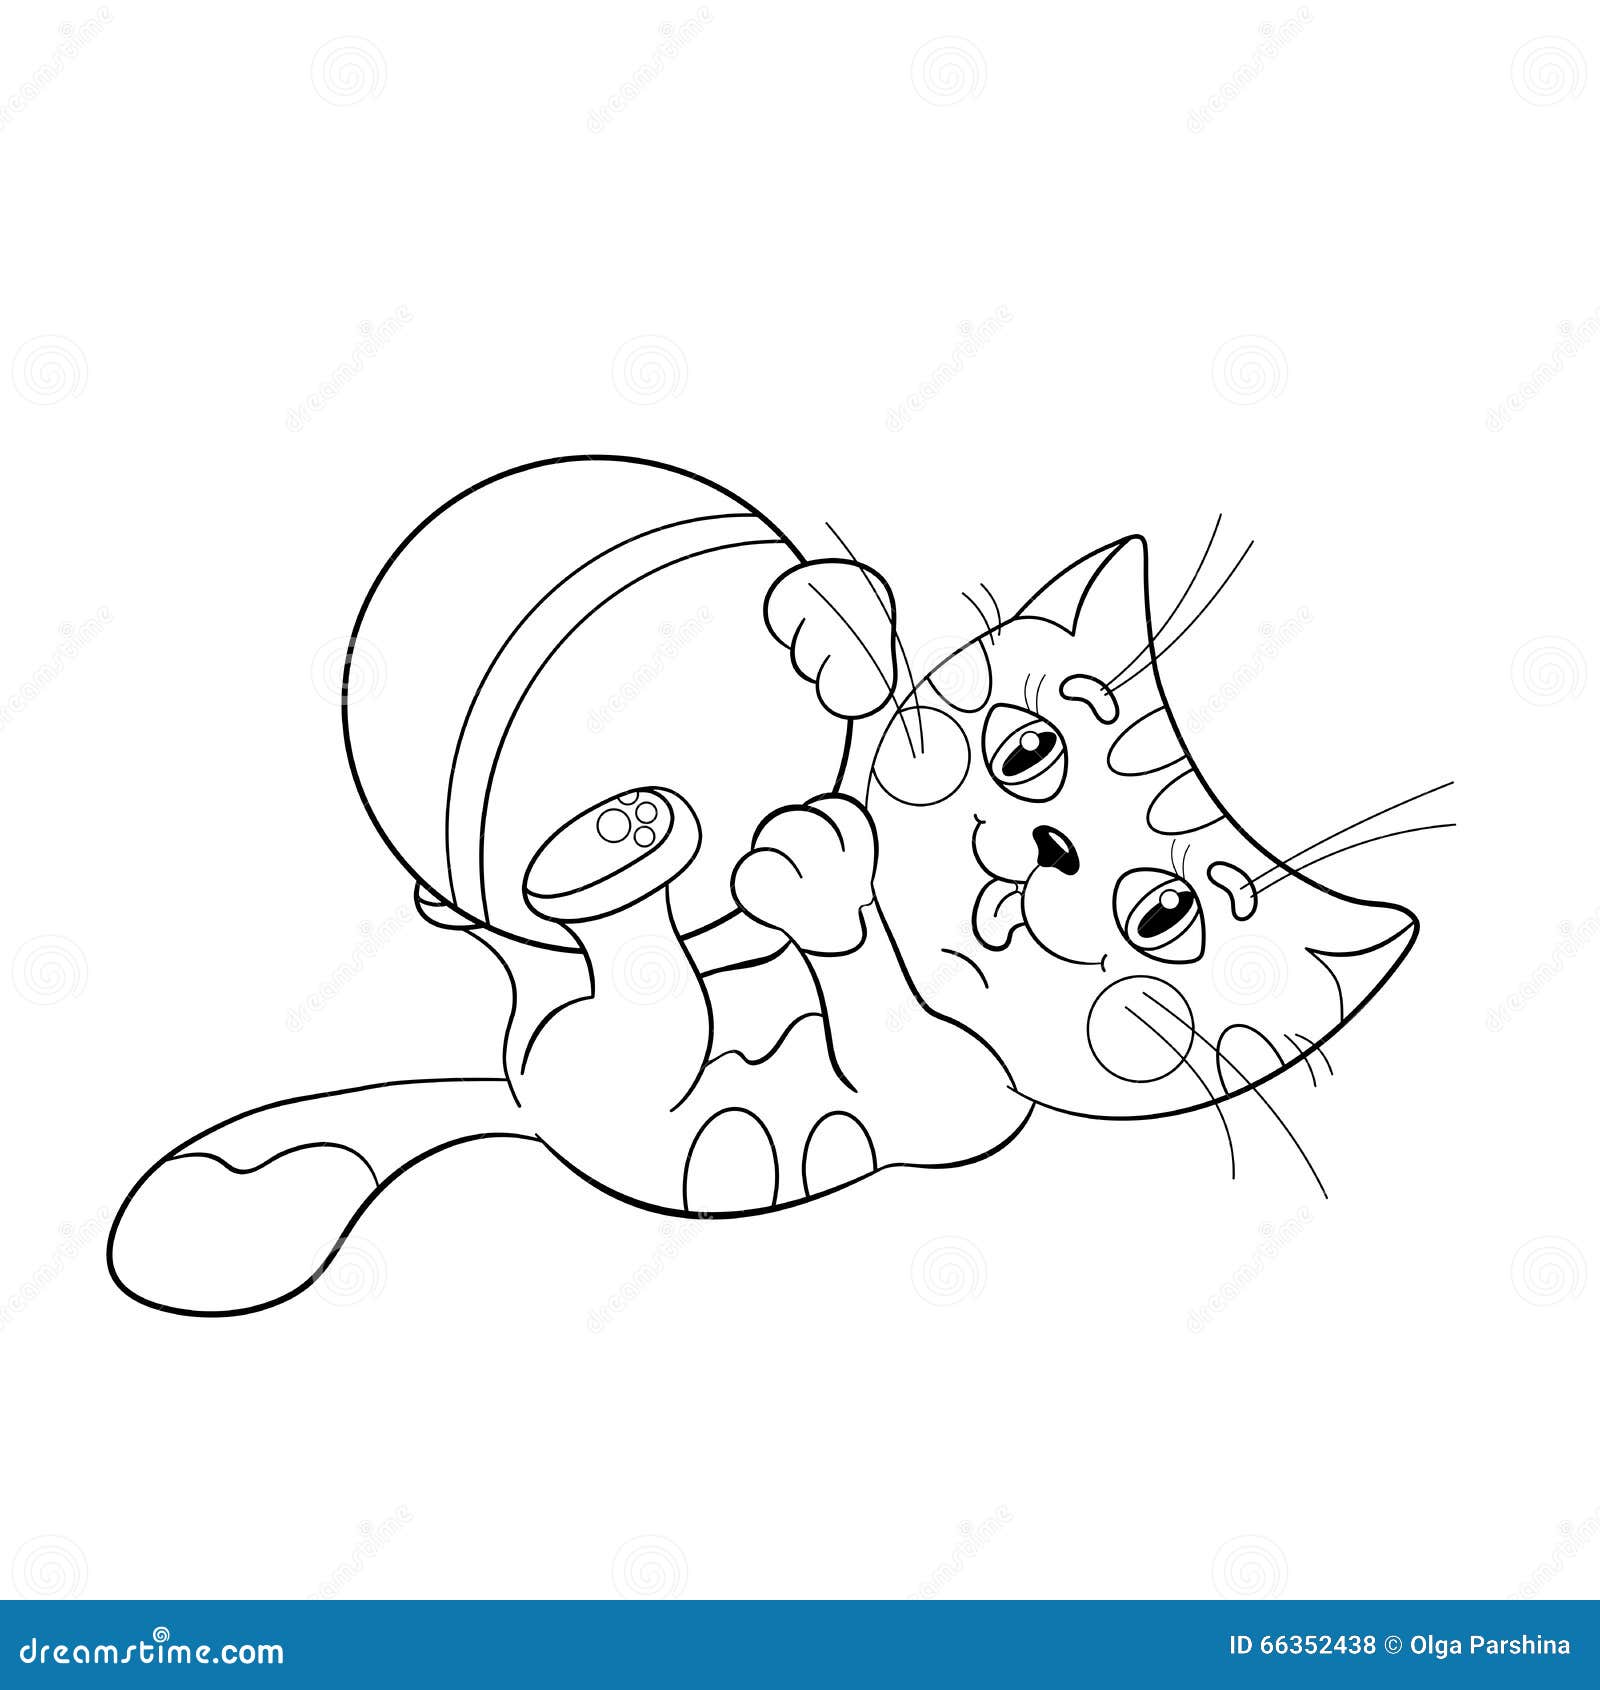 Download Coloring Page Outline Of A Fluffy Kitten Playing With Ball ...